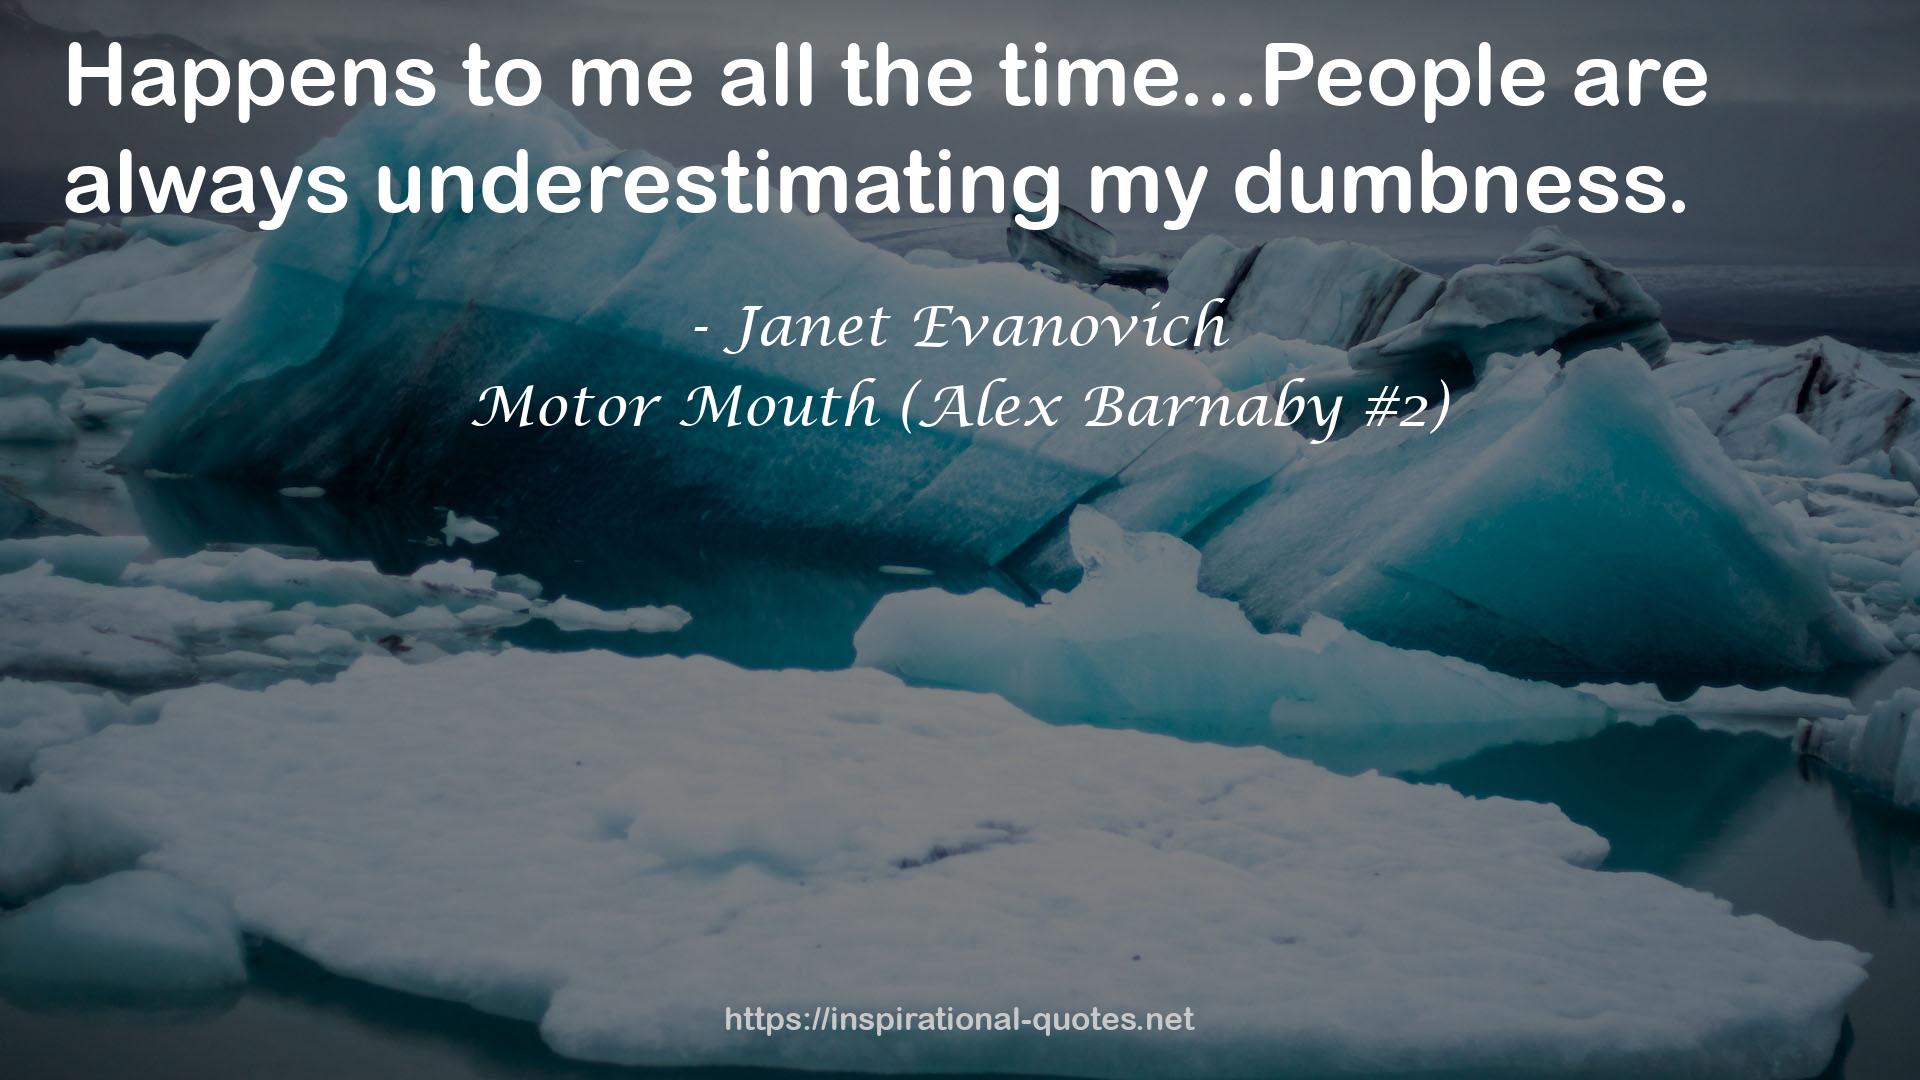 Motor Mouth (Alex Barnaby #2) QUOTES